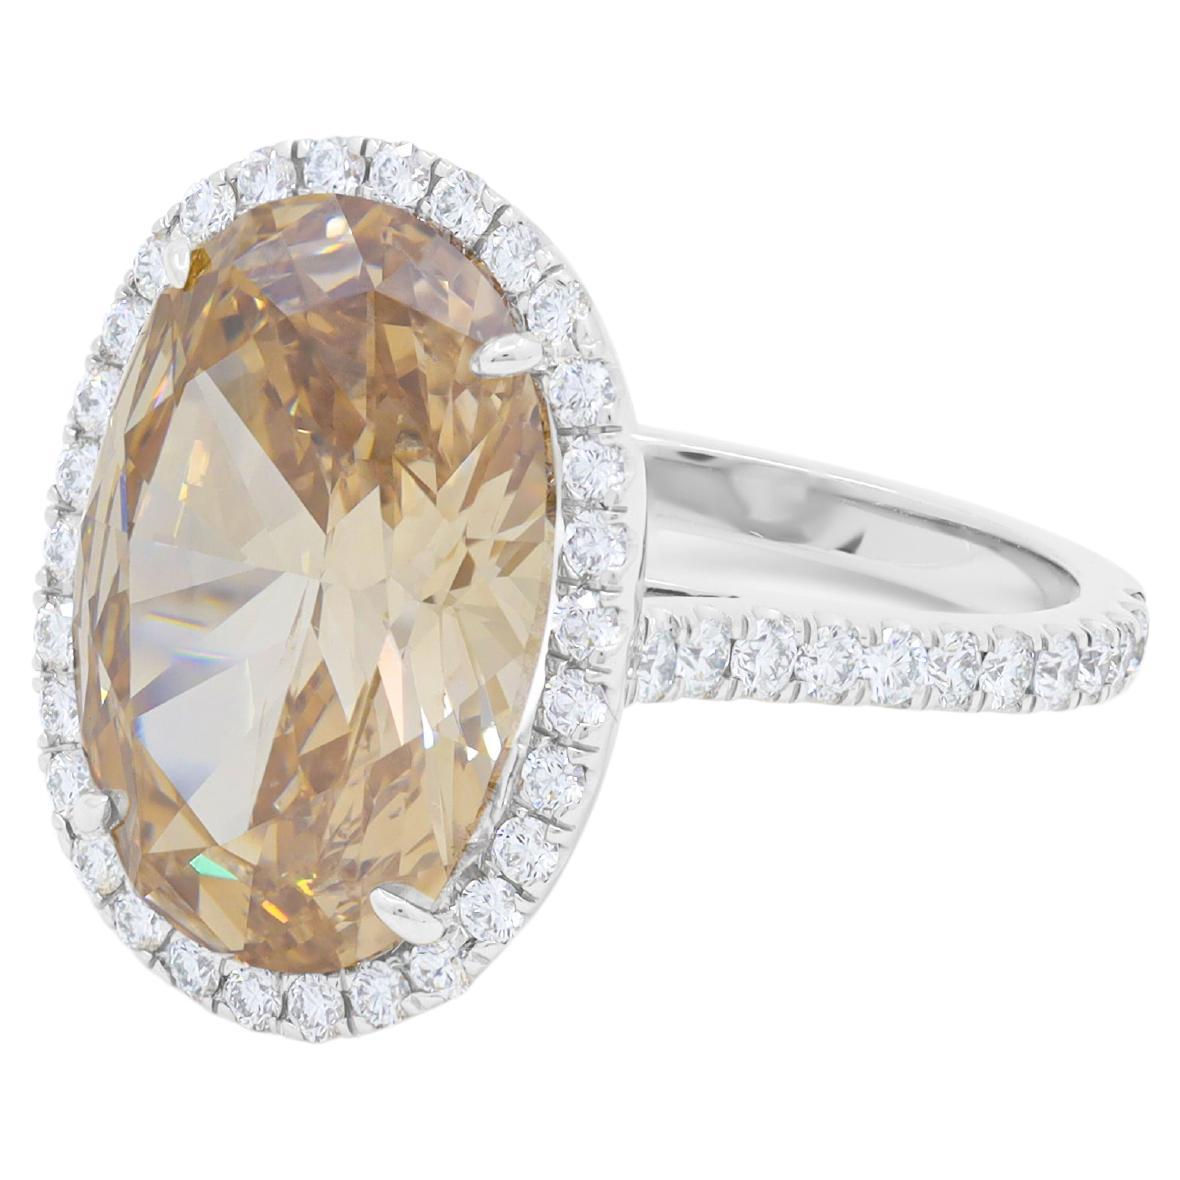 Platinum ring featuring a center 7.91 ct GIA certified fancy conac brown SI clarity  oval cut diamond surrounded by .75 cts tw of diamonds in a halo setting 
Diana M. is a leading supplier of top-quality fine jewelry for over 35 years.
Diana M is